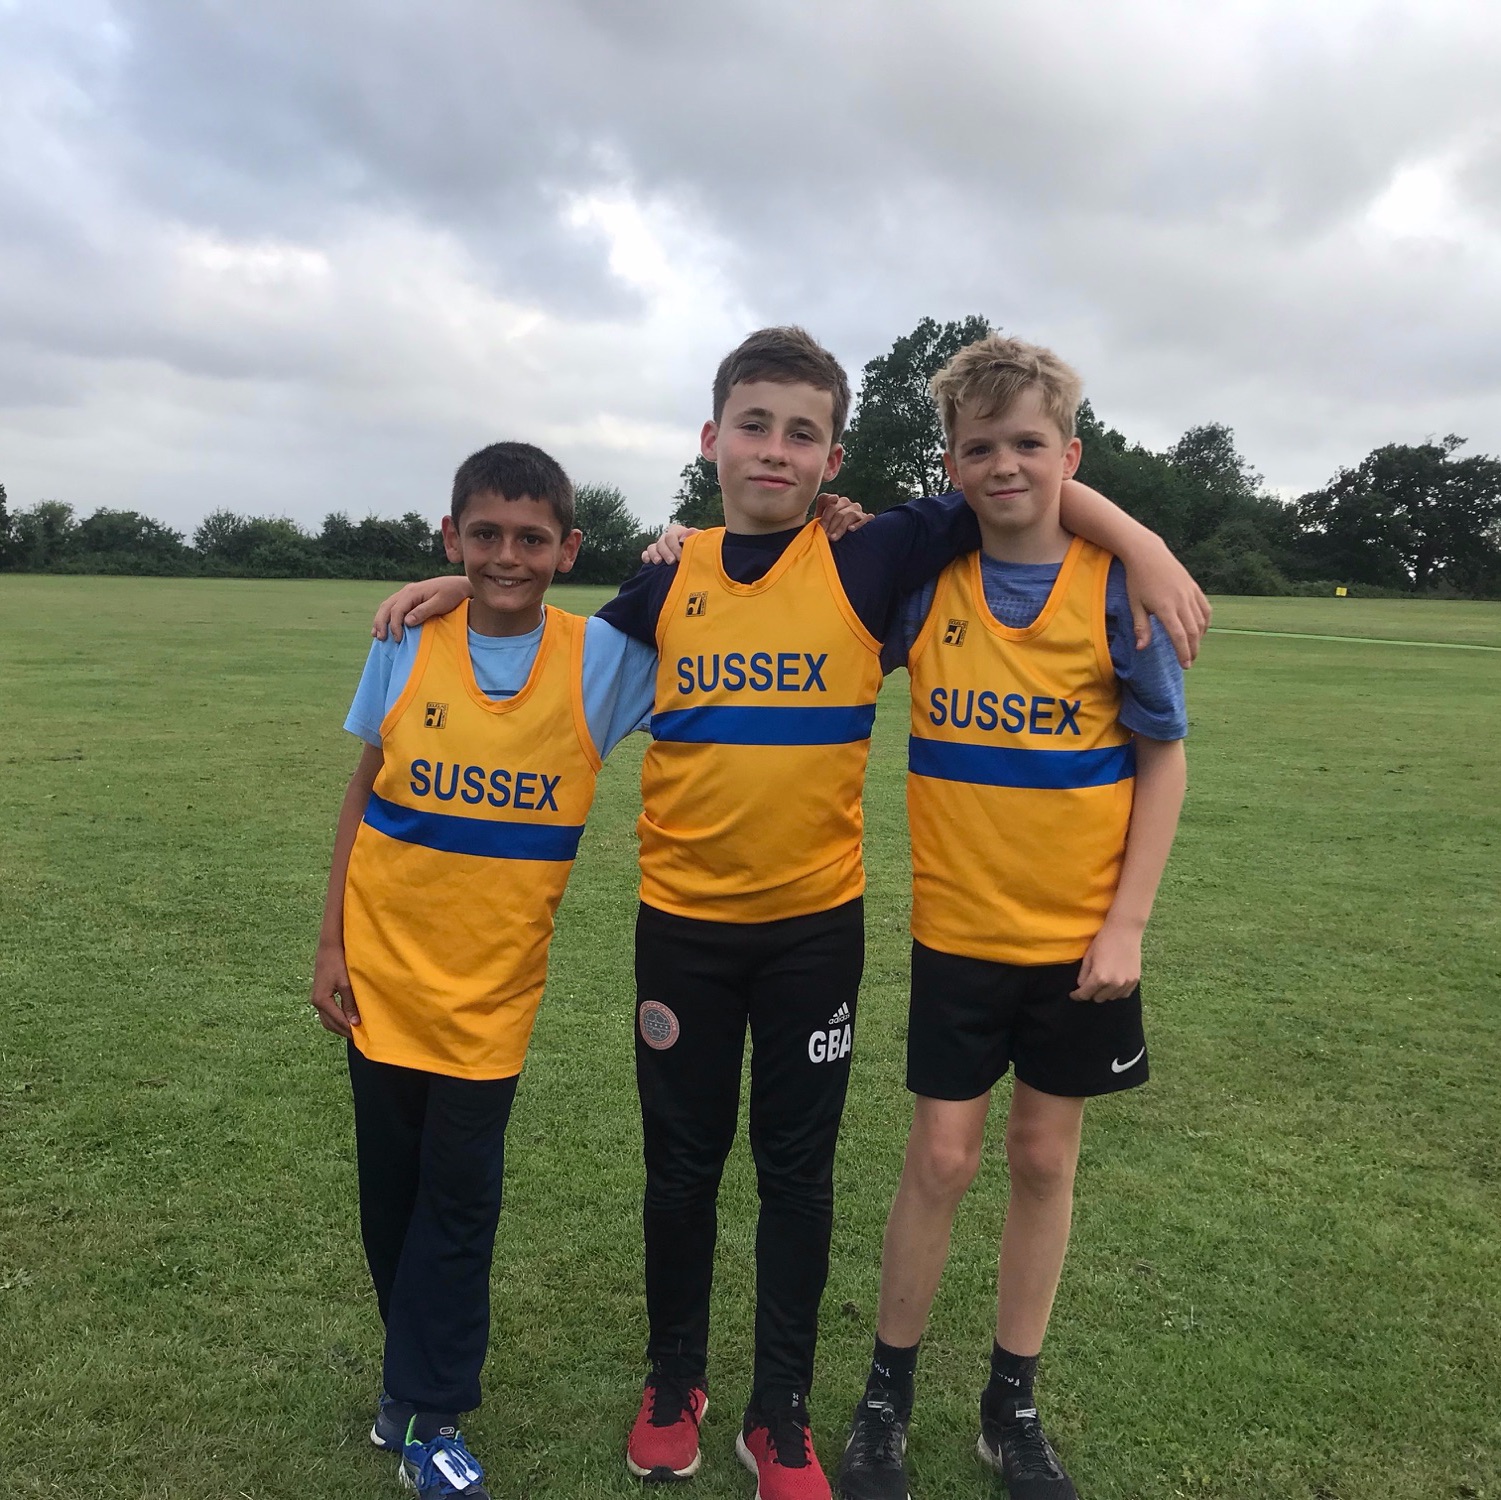 U13 Harriers selected to represent Sussex